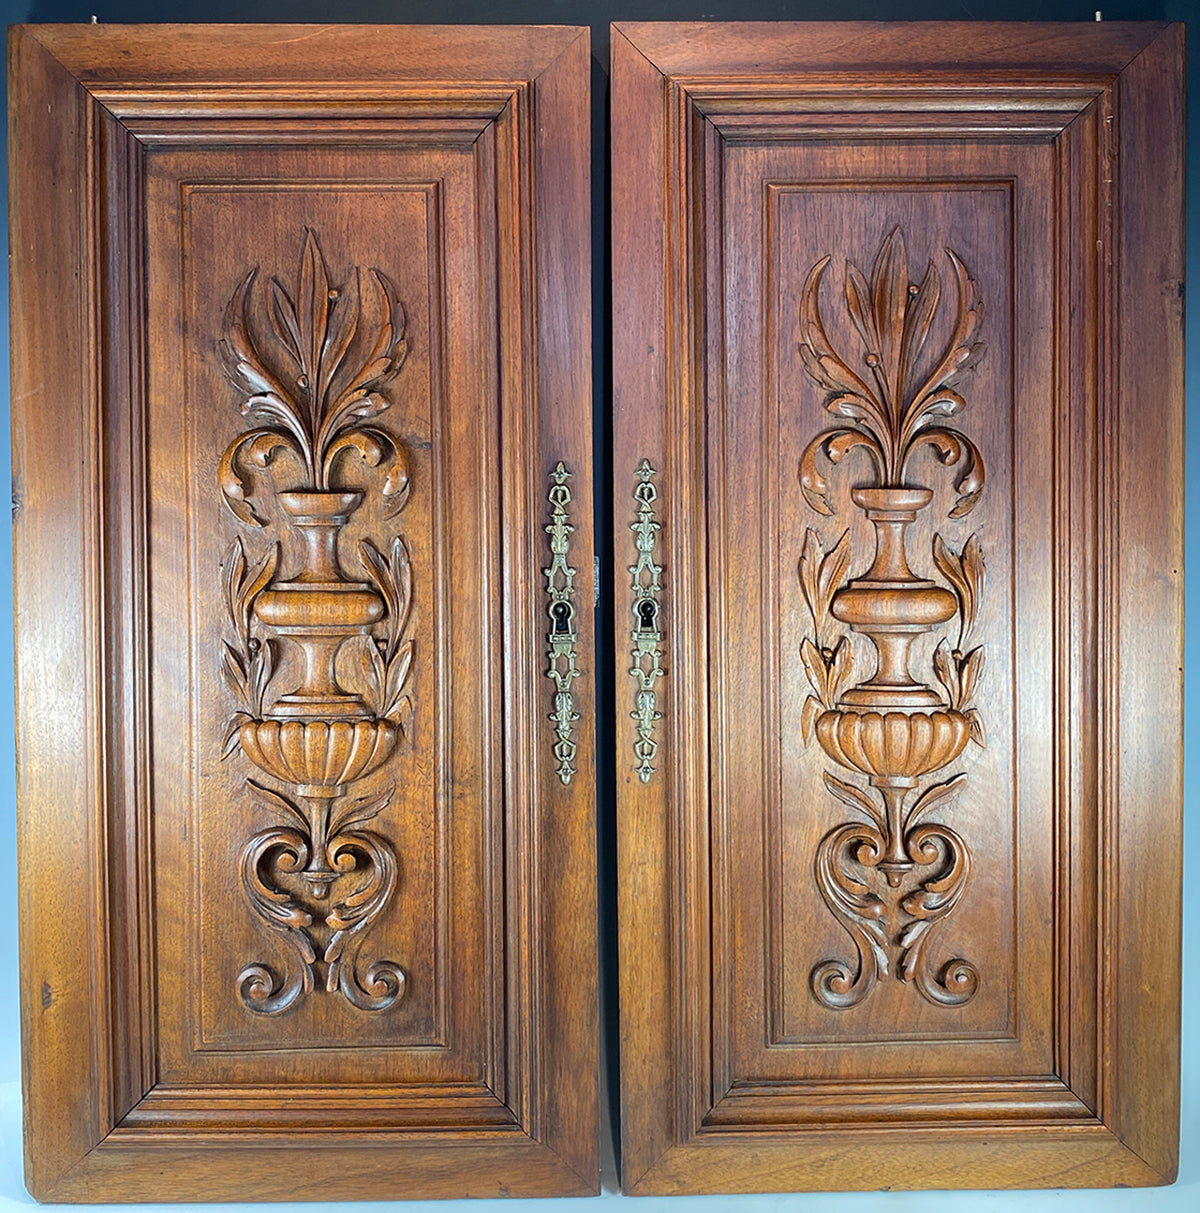 Pair Antique HC French Neoclassical Walnut Hutch or Cabinet Doors, Cabinetry Panels